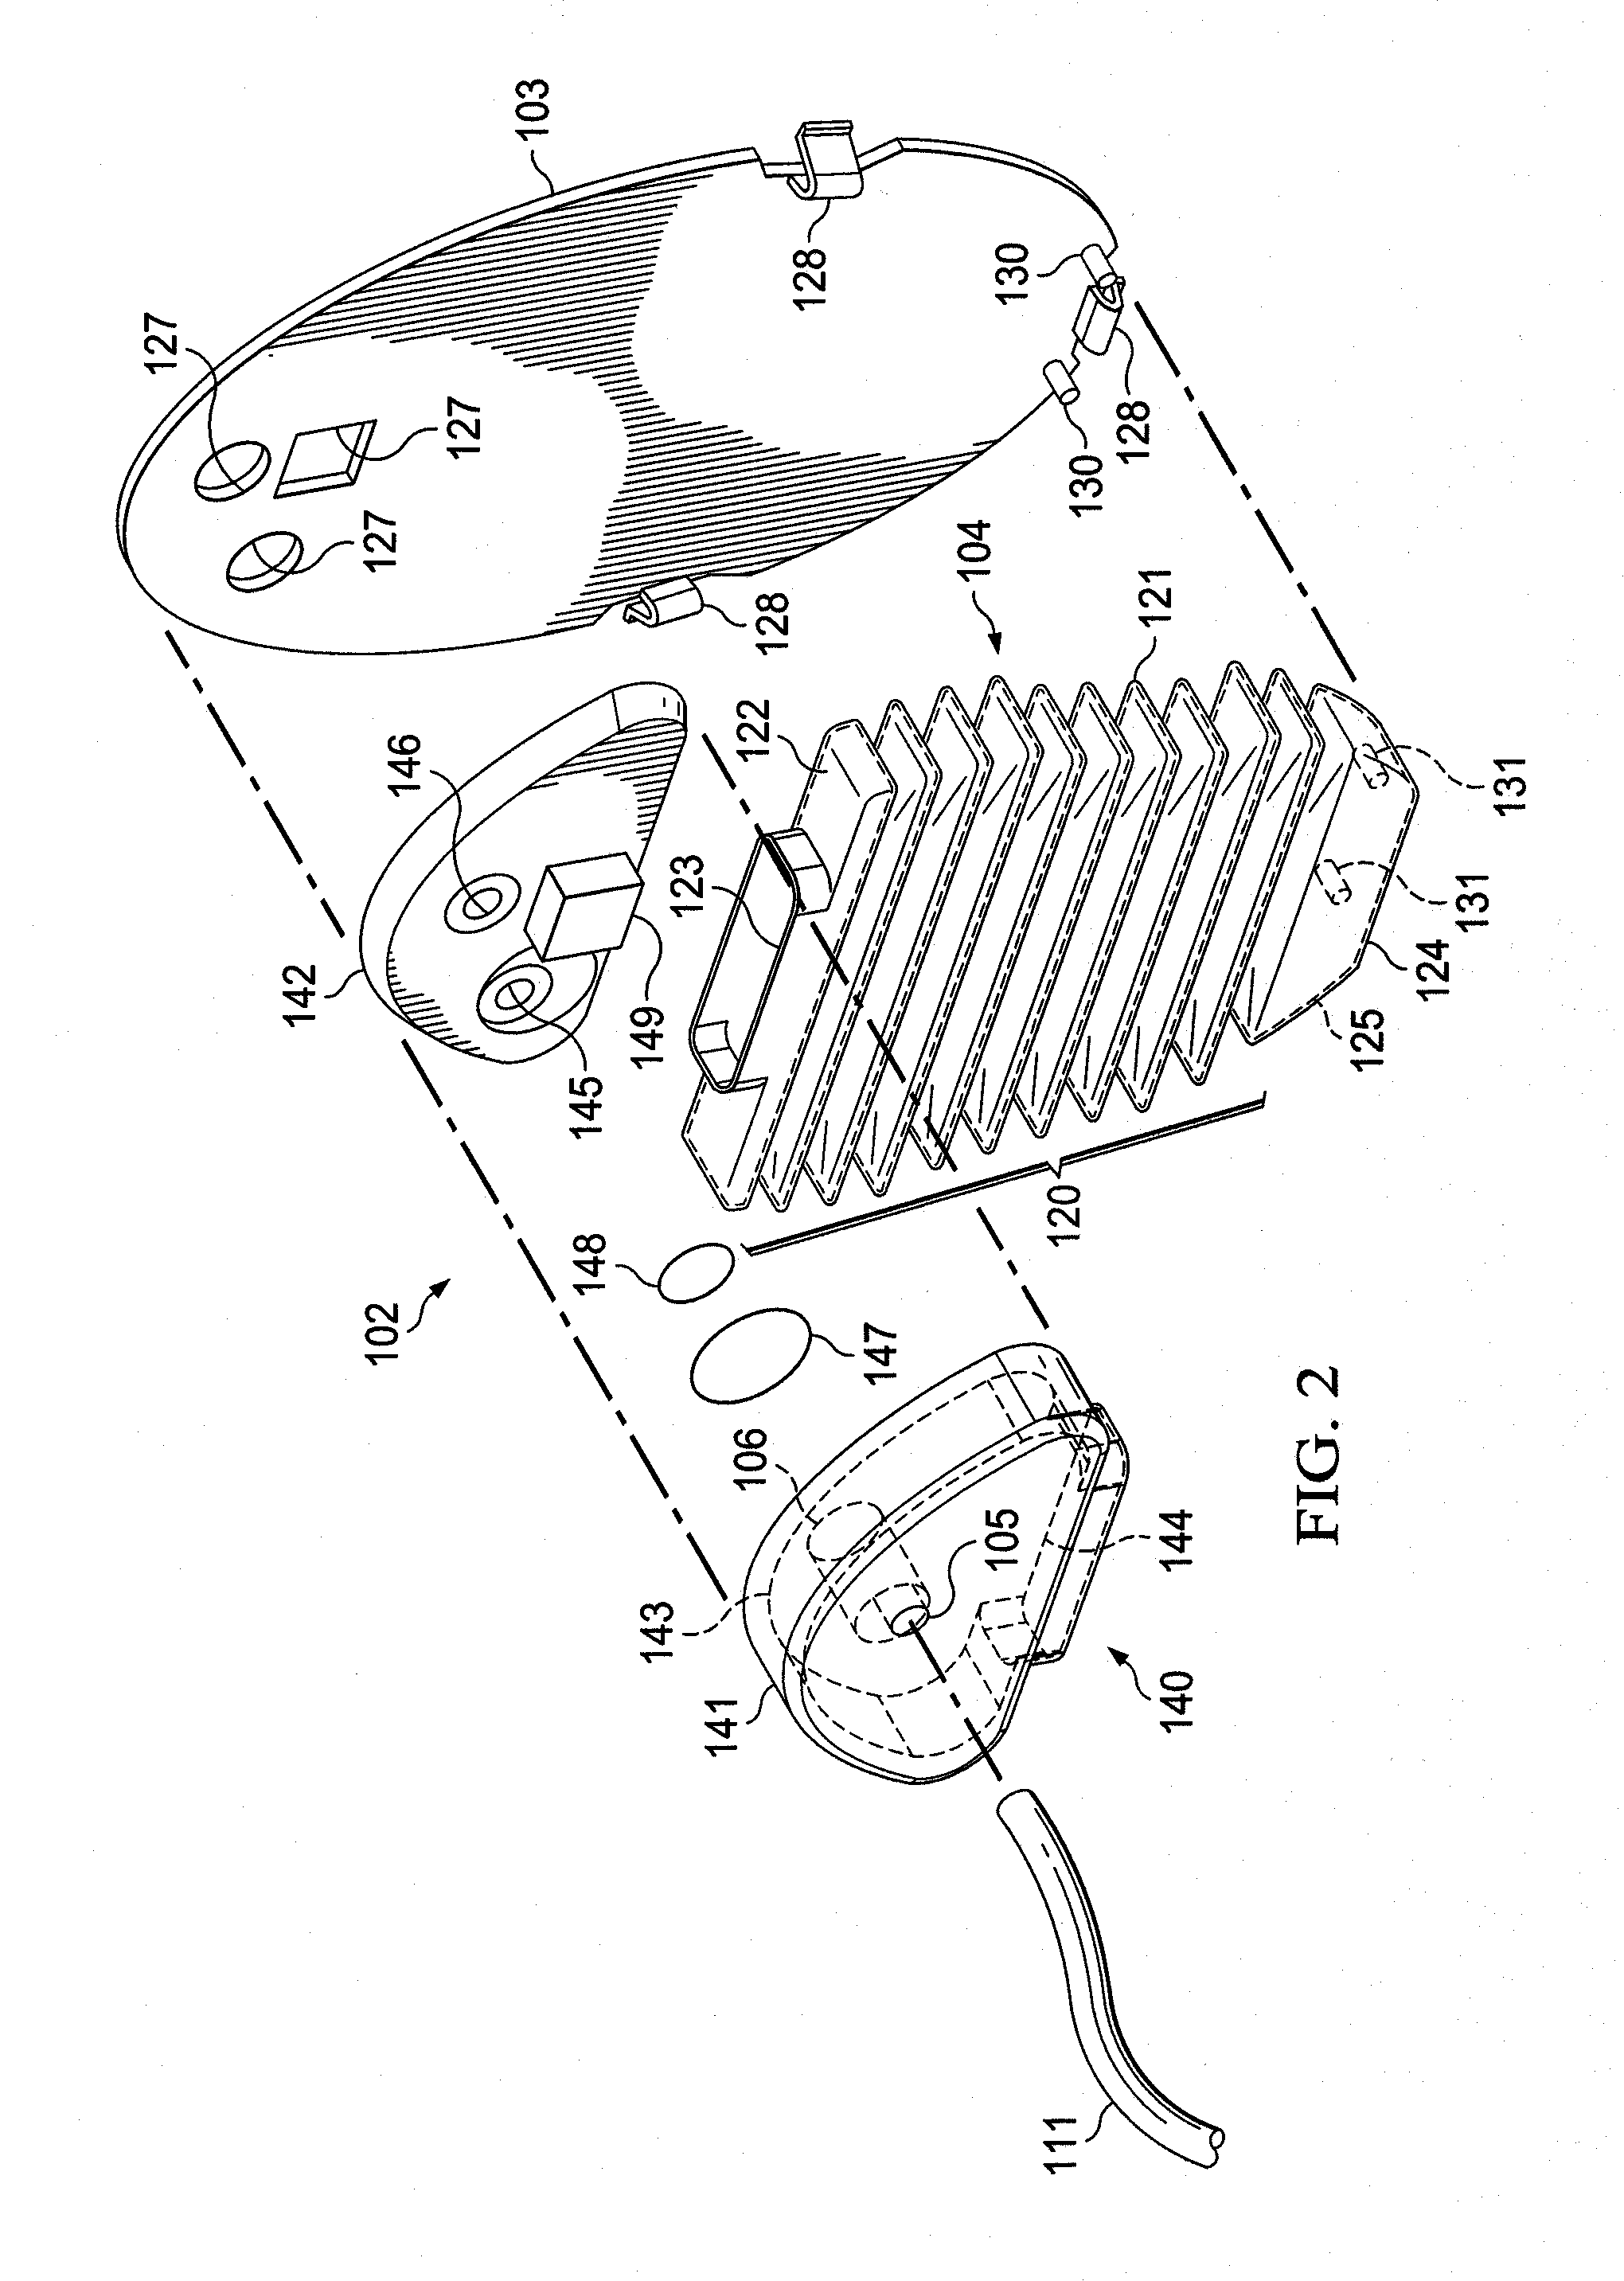 Collapsible canister for use with reduced pressure therapy device